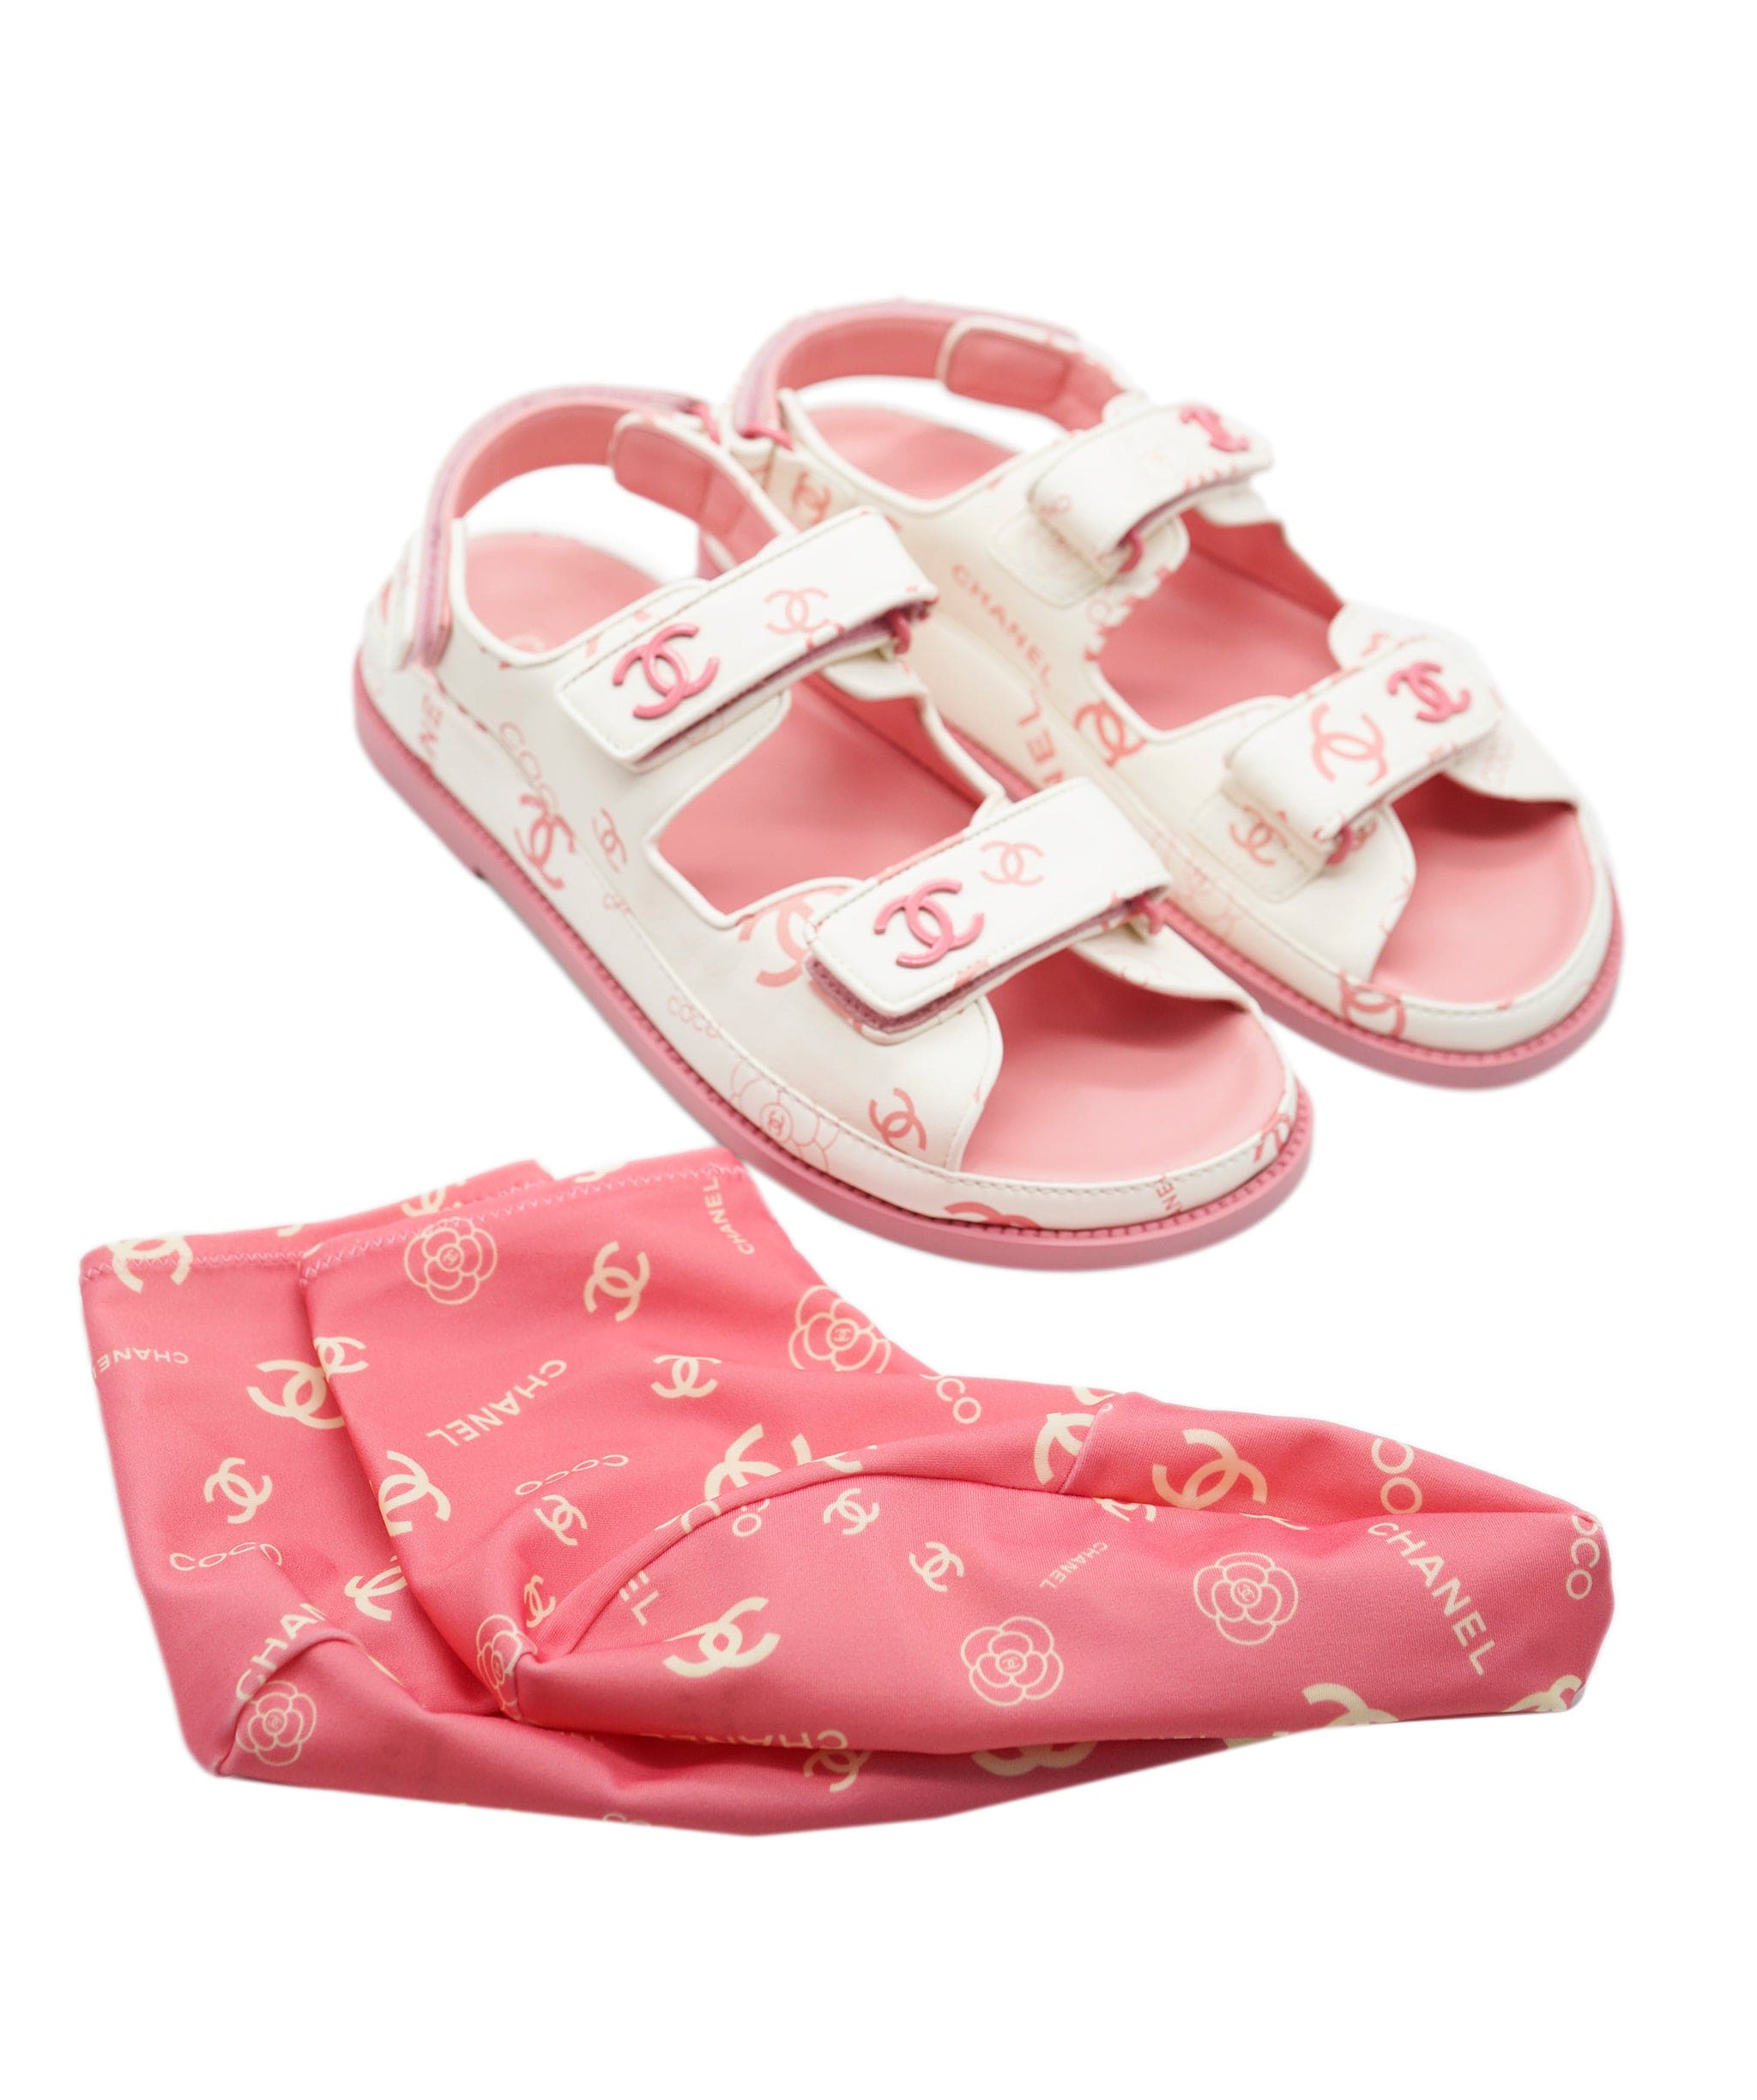 Chanel Limited Edition Pink Dad Sandals With Socks 39 ALL0418